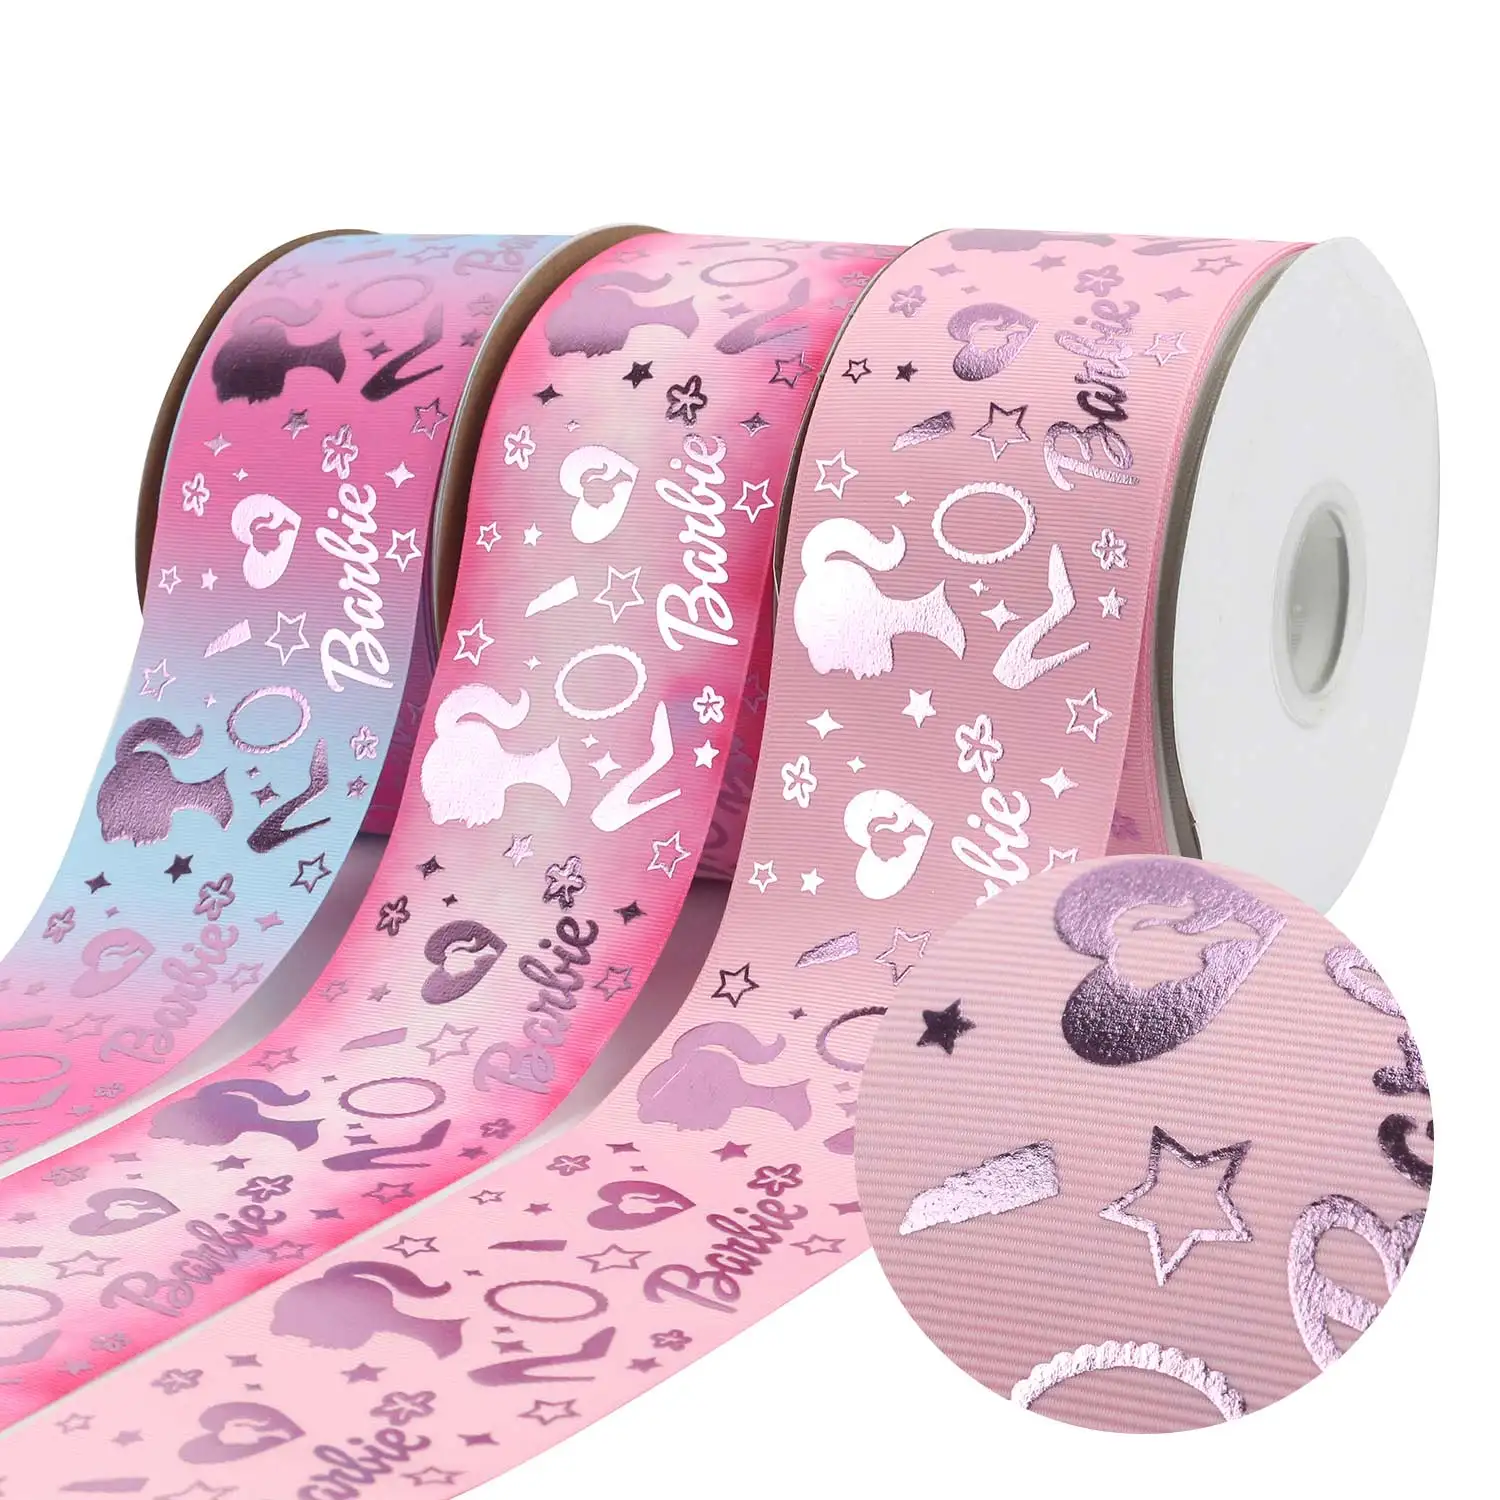 

Midi Ribbons Liston 75mm Pink Foil Printed Girls Polyester Grosgrain Ribbon for Hair Bows DIY Crafts, Request